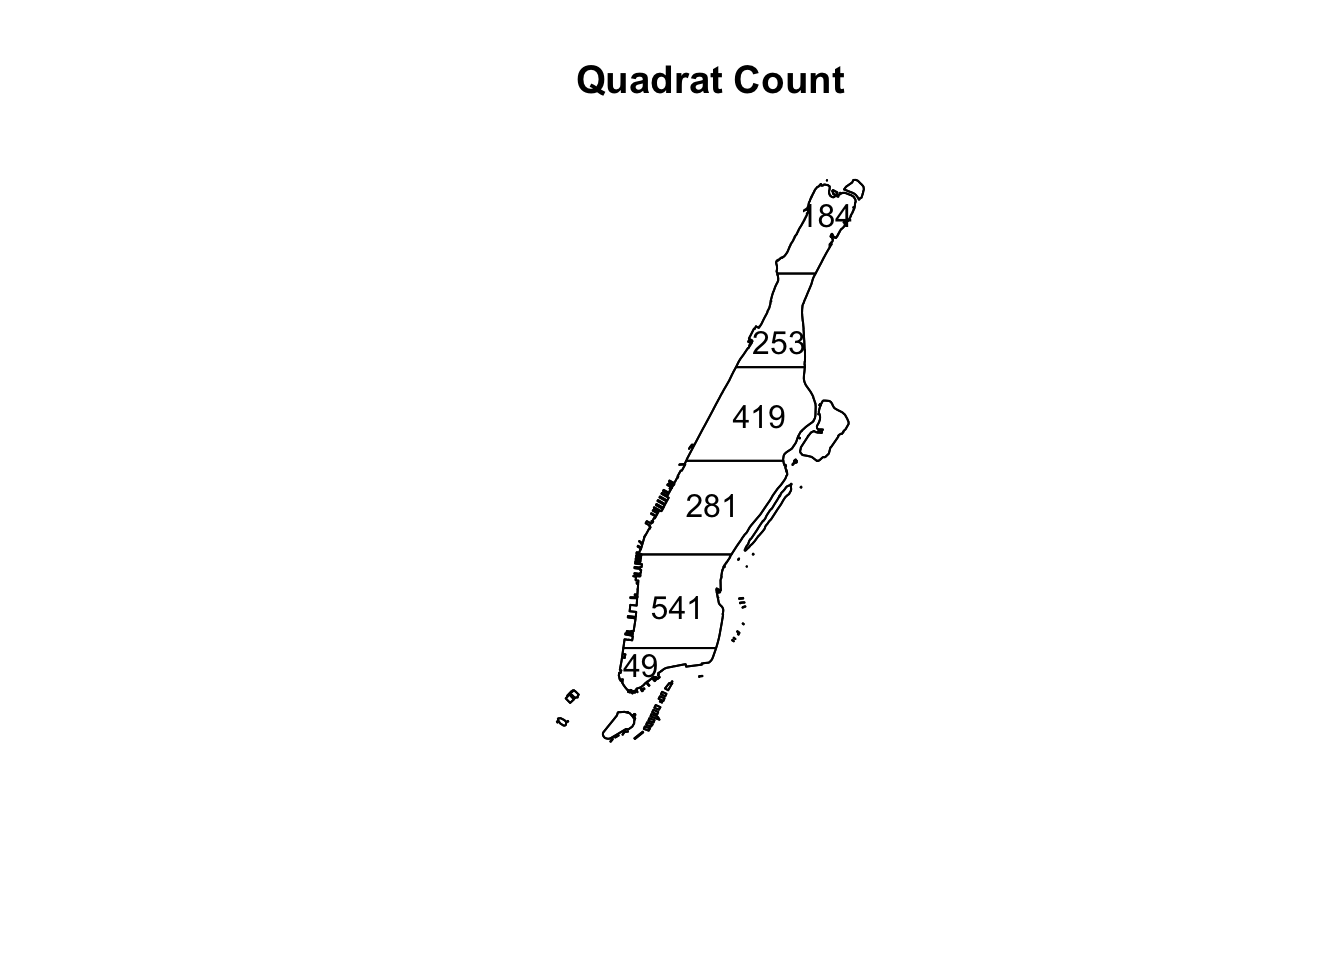 The outline of Manhattan is divided, using five horizontal lines, into sections. Starting from the tip, the spacing of the lines is even. Numbers appear in each section, roughly corresponding to their area, except for the fourth from the top being smaller. The title 'Quadrat Count' appears above.